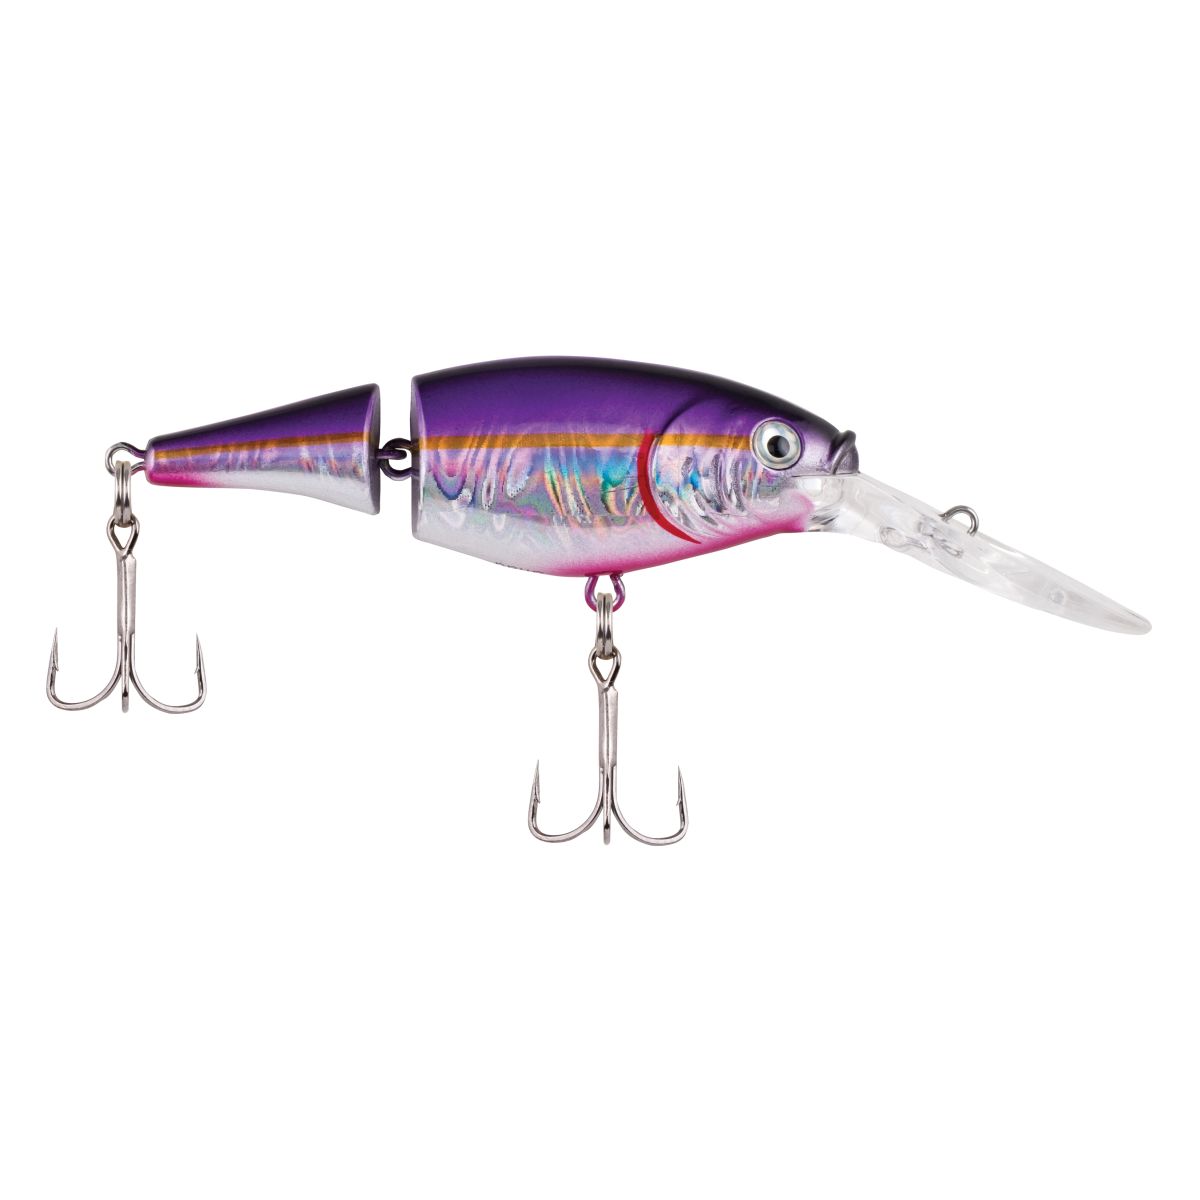 FLICKER SHAD JOINTED SLICK 7CM ALEWIFE